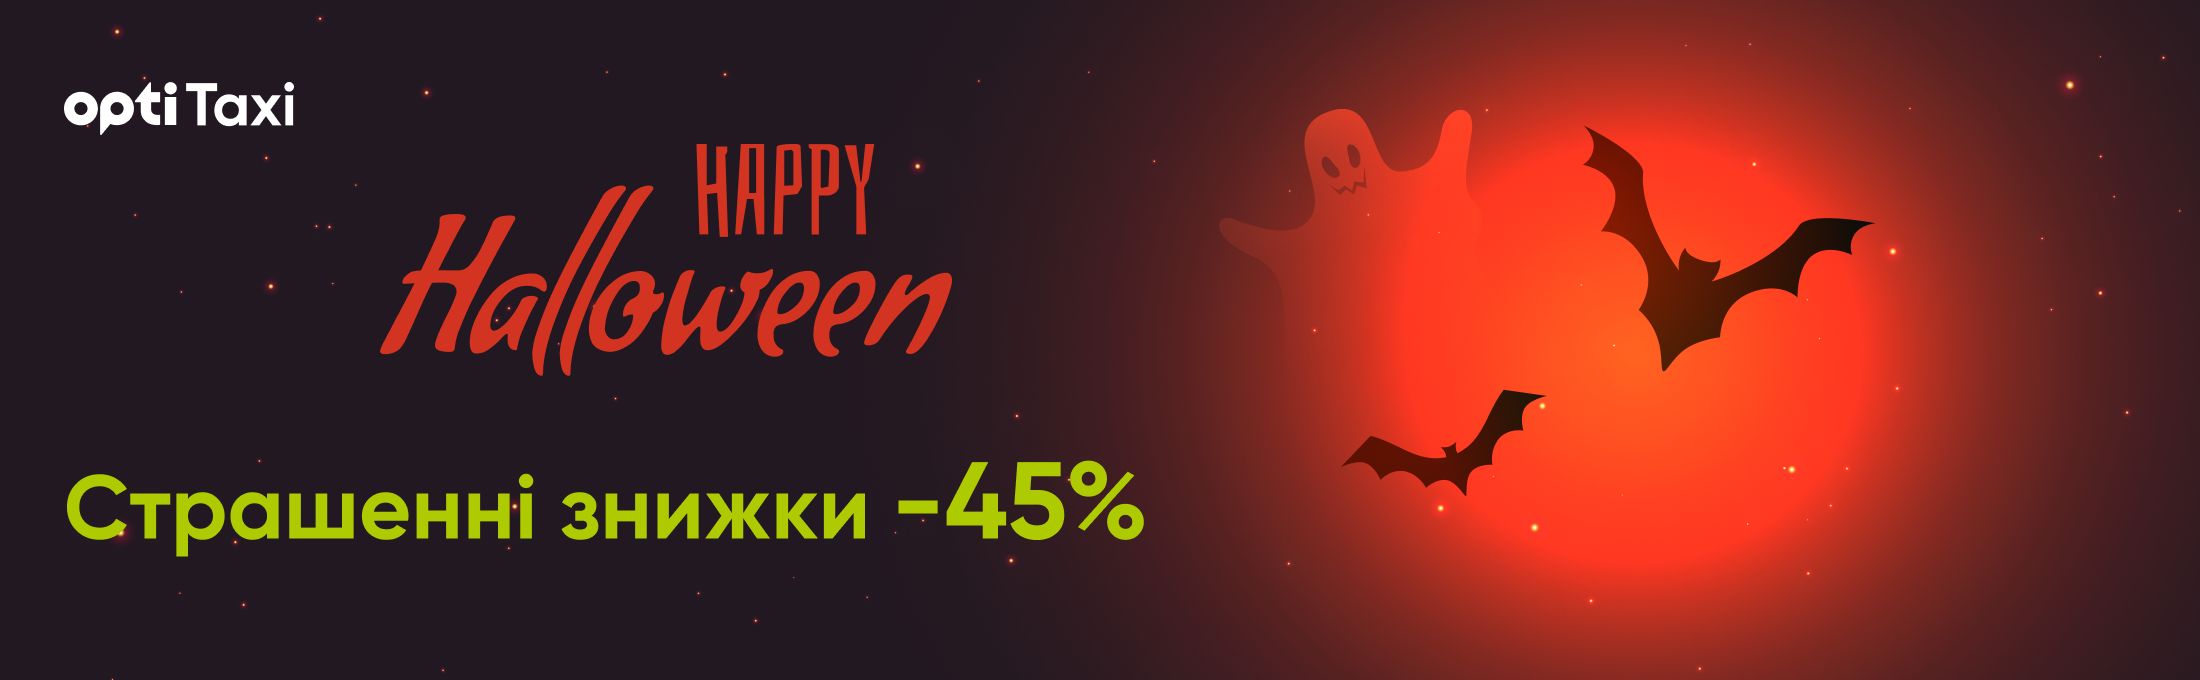 Celebrate Halloween with Opti Taxi: take advantage of a scary 45% discount Mariupol